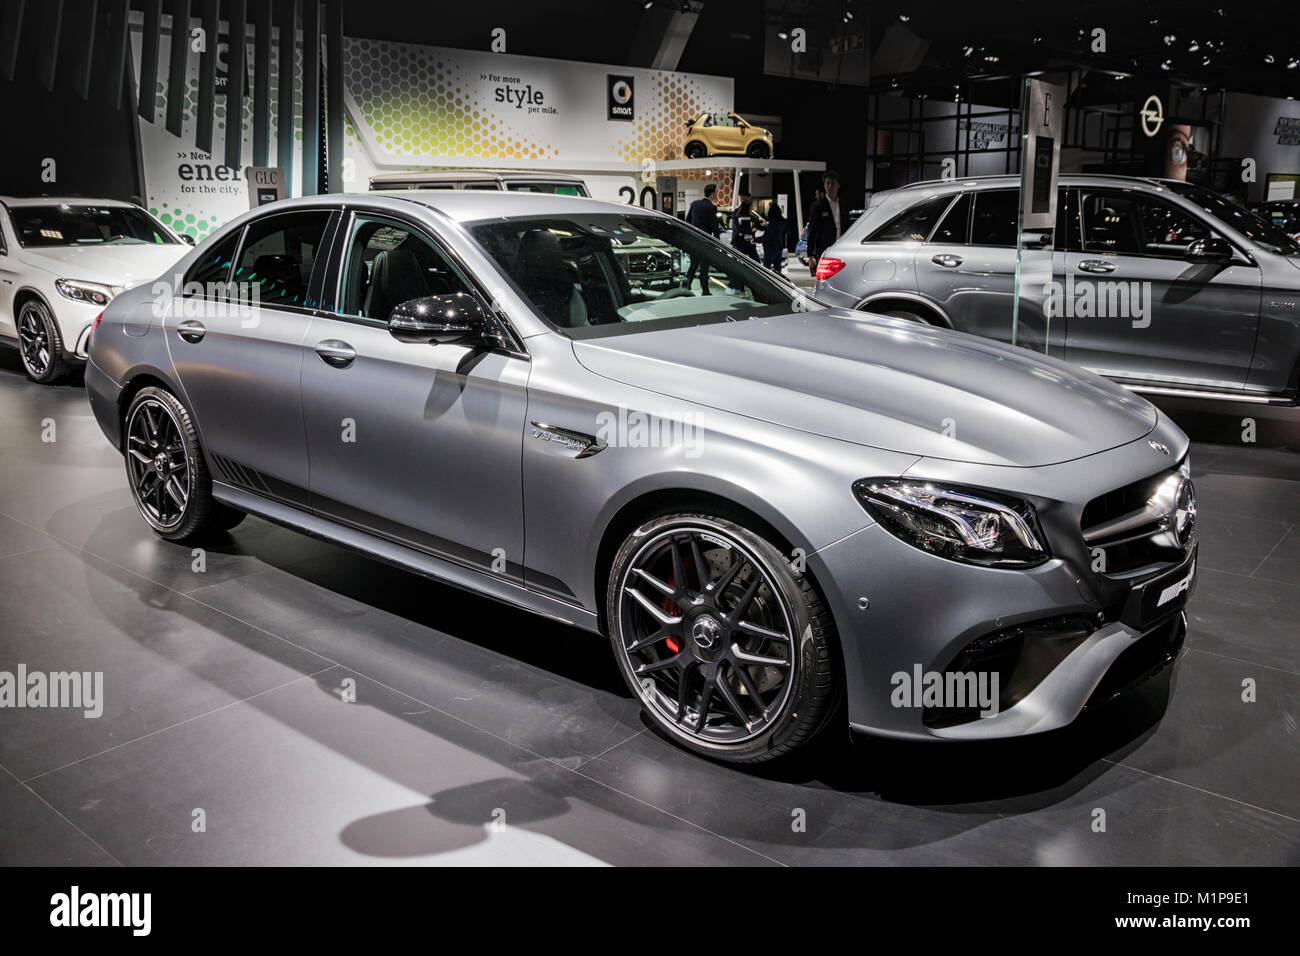 BRUSSELS - JAN 10, 2018: Mercedes AMG E63 S 4MATIC car shown at the Brussels Motor Show. Stock Photo